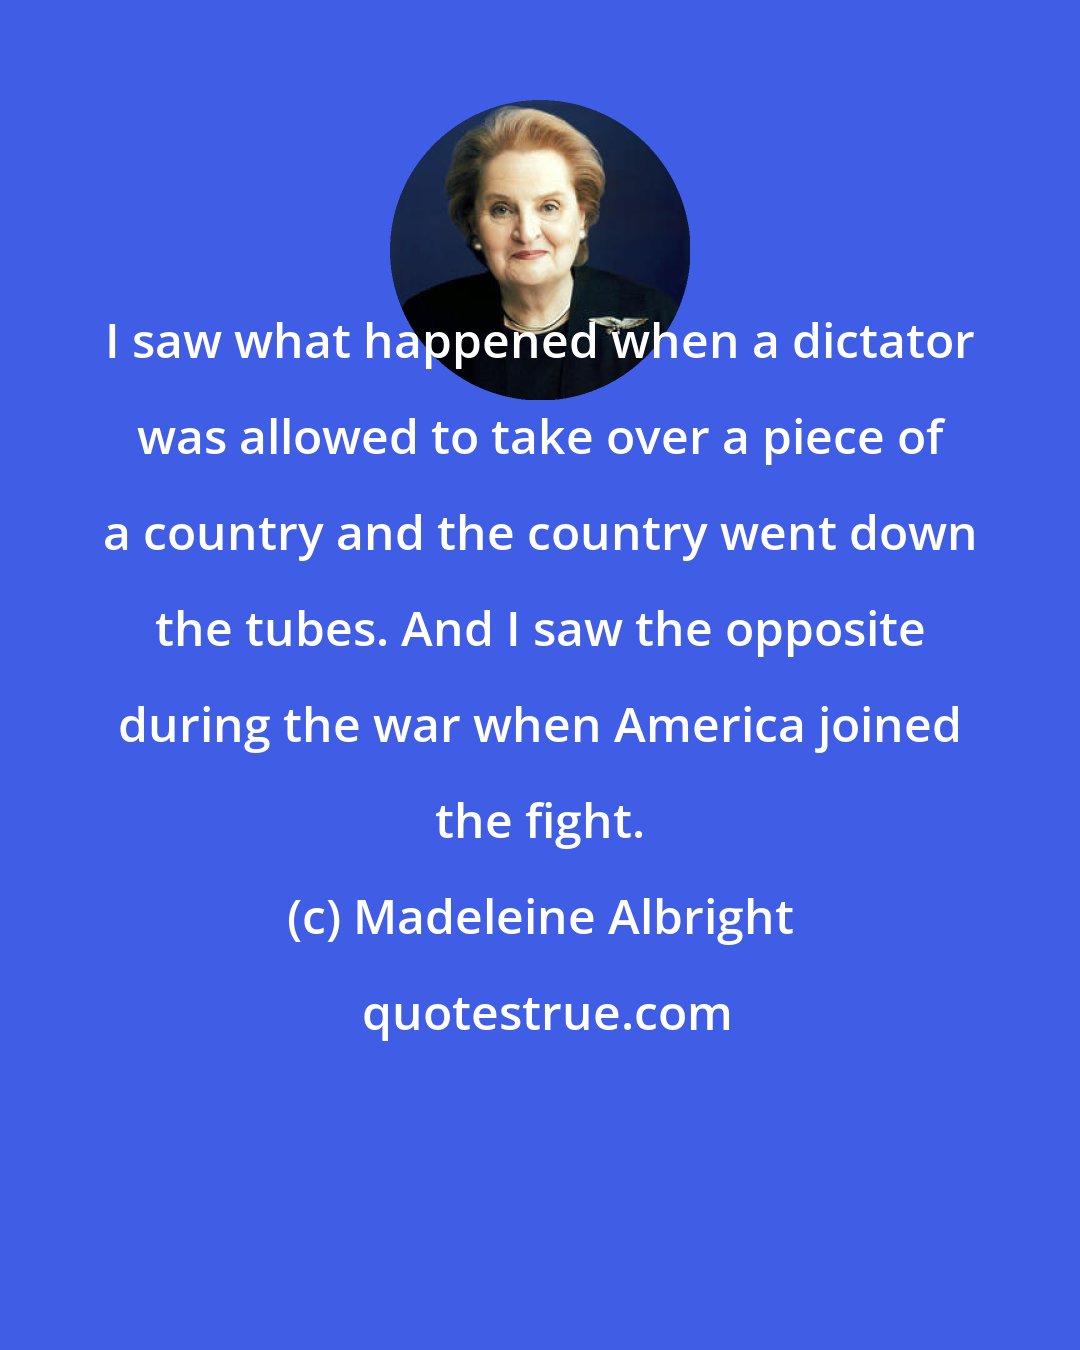 Madeleine Albright: I saw what happened when a dictator was allowed to take over a piece of a country and the country went down the tubes. And I saw the opposite during the war when America joined the fight.